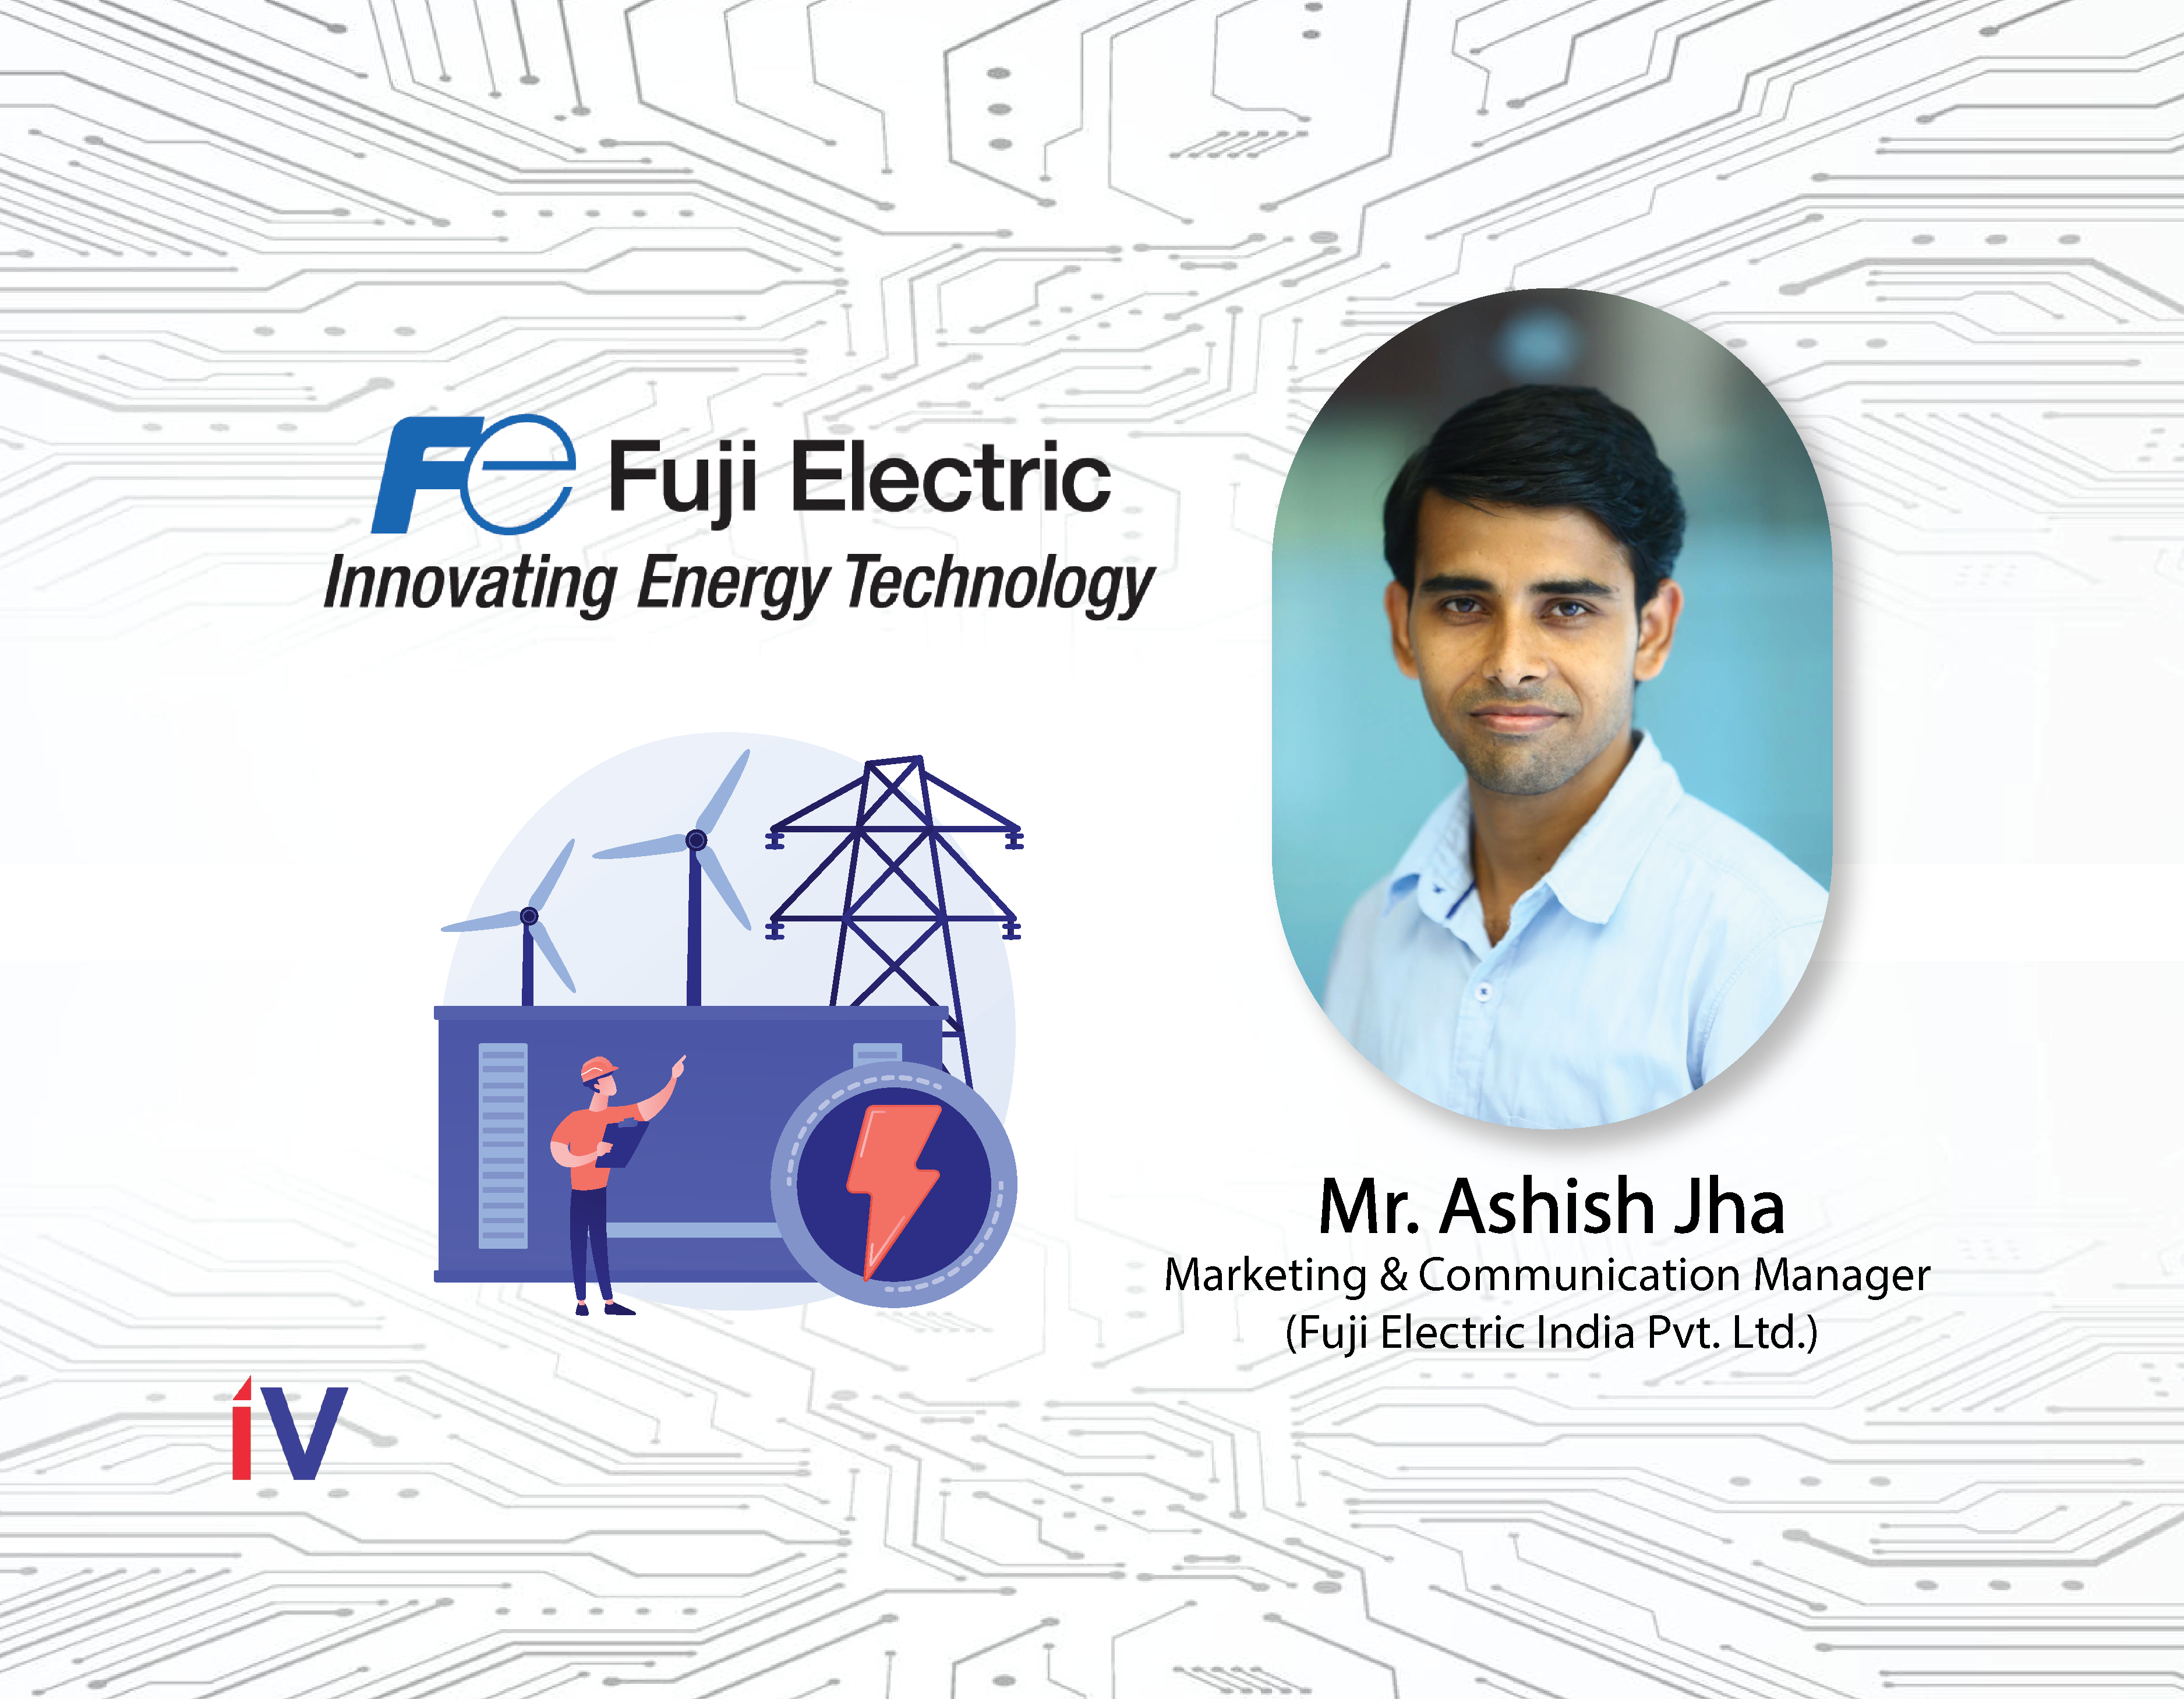 Exclusive Interview with Mr. Ashish Jha, Marketing and Communication Manager, Fuji Electric India Pvt. Ltd.